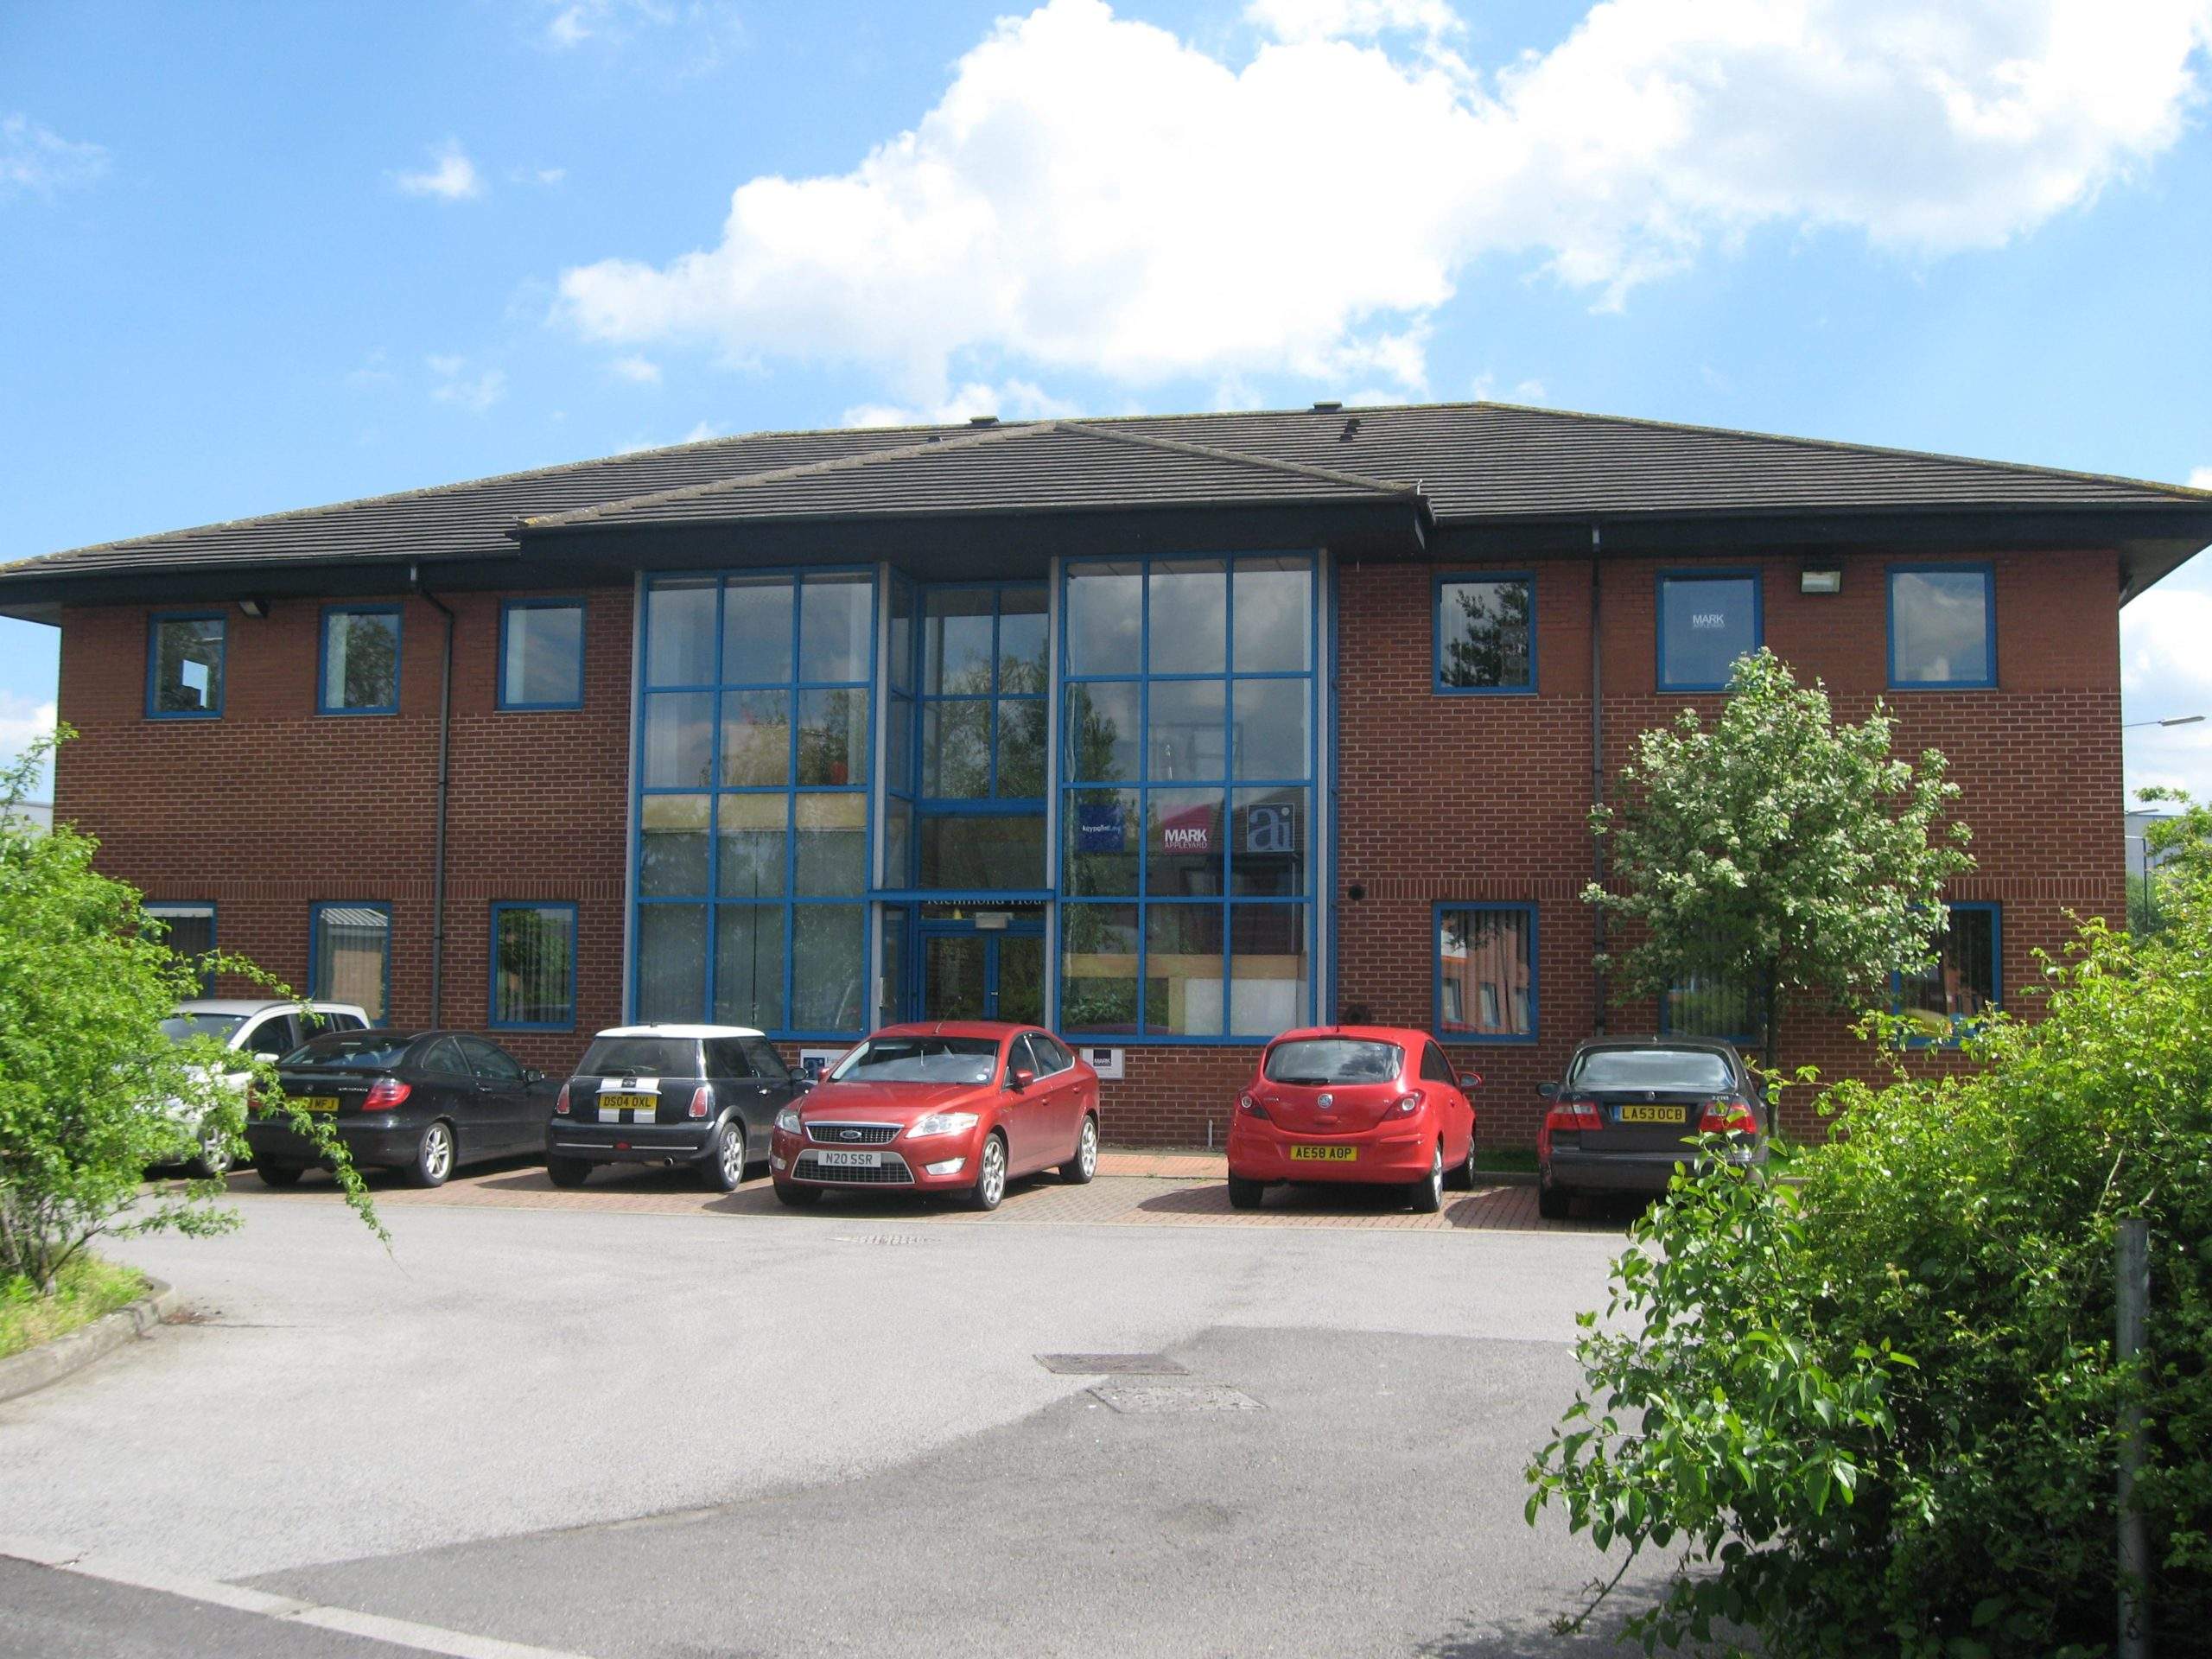 PPH COMMERCIAL IN DONCASTER HAVE RELOCATED